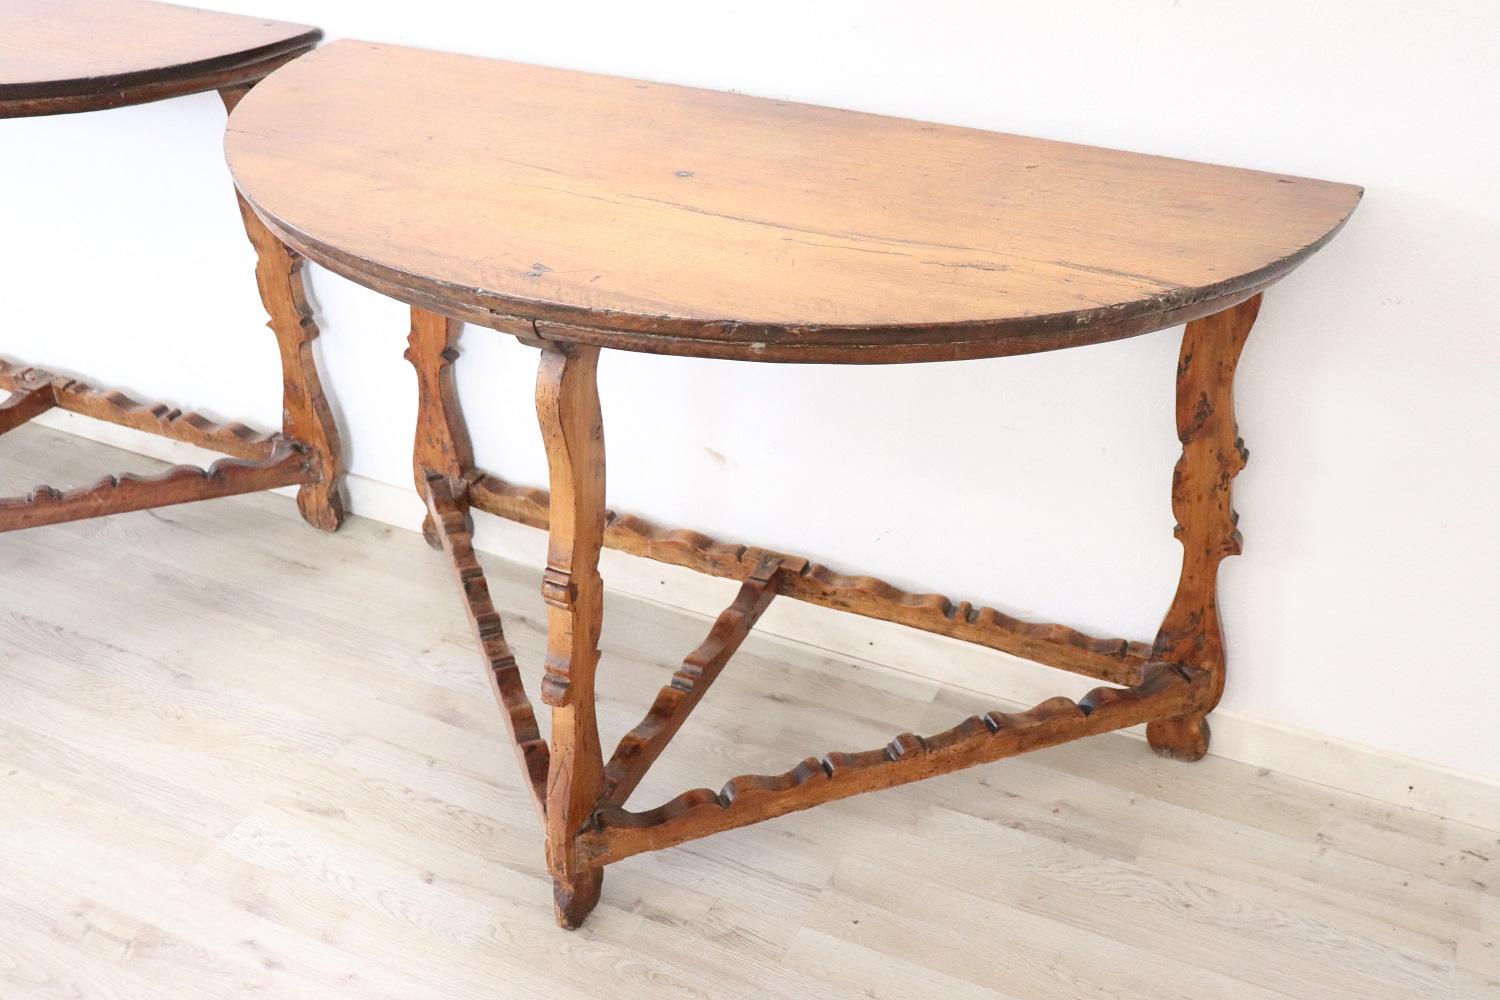 Italian 17th Century Rare Antique Pair of Console Table Convertible into a Round Table